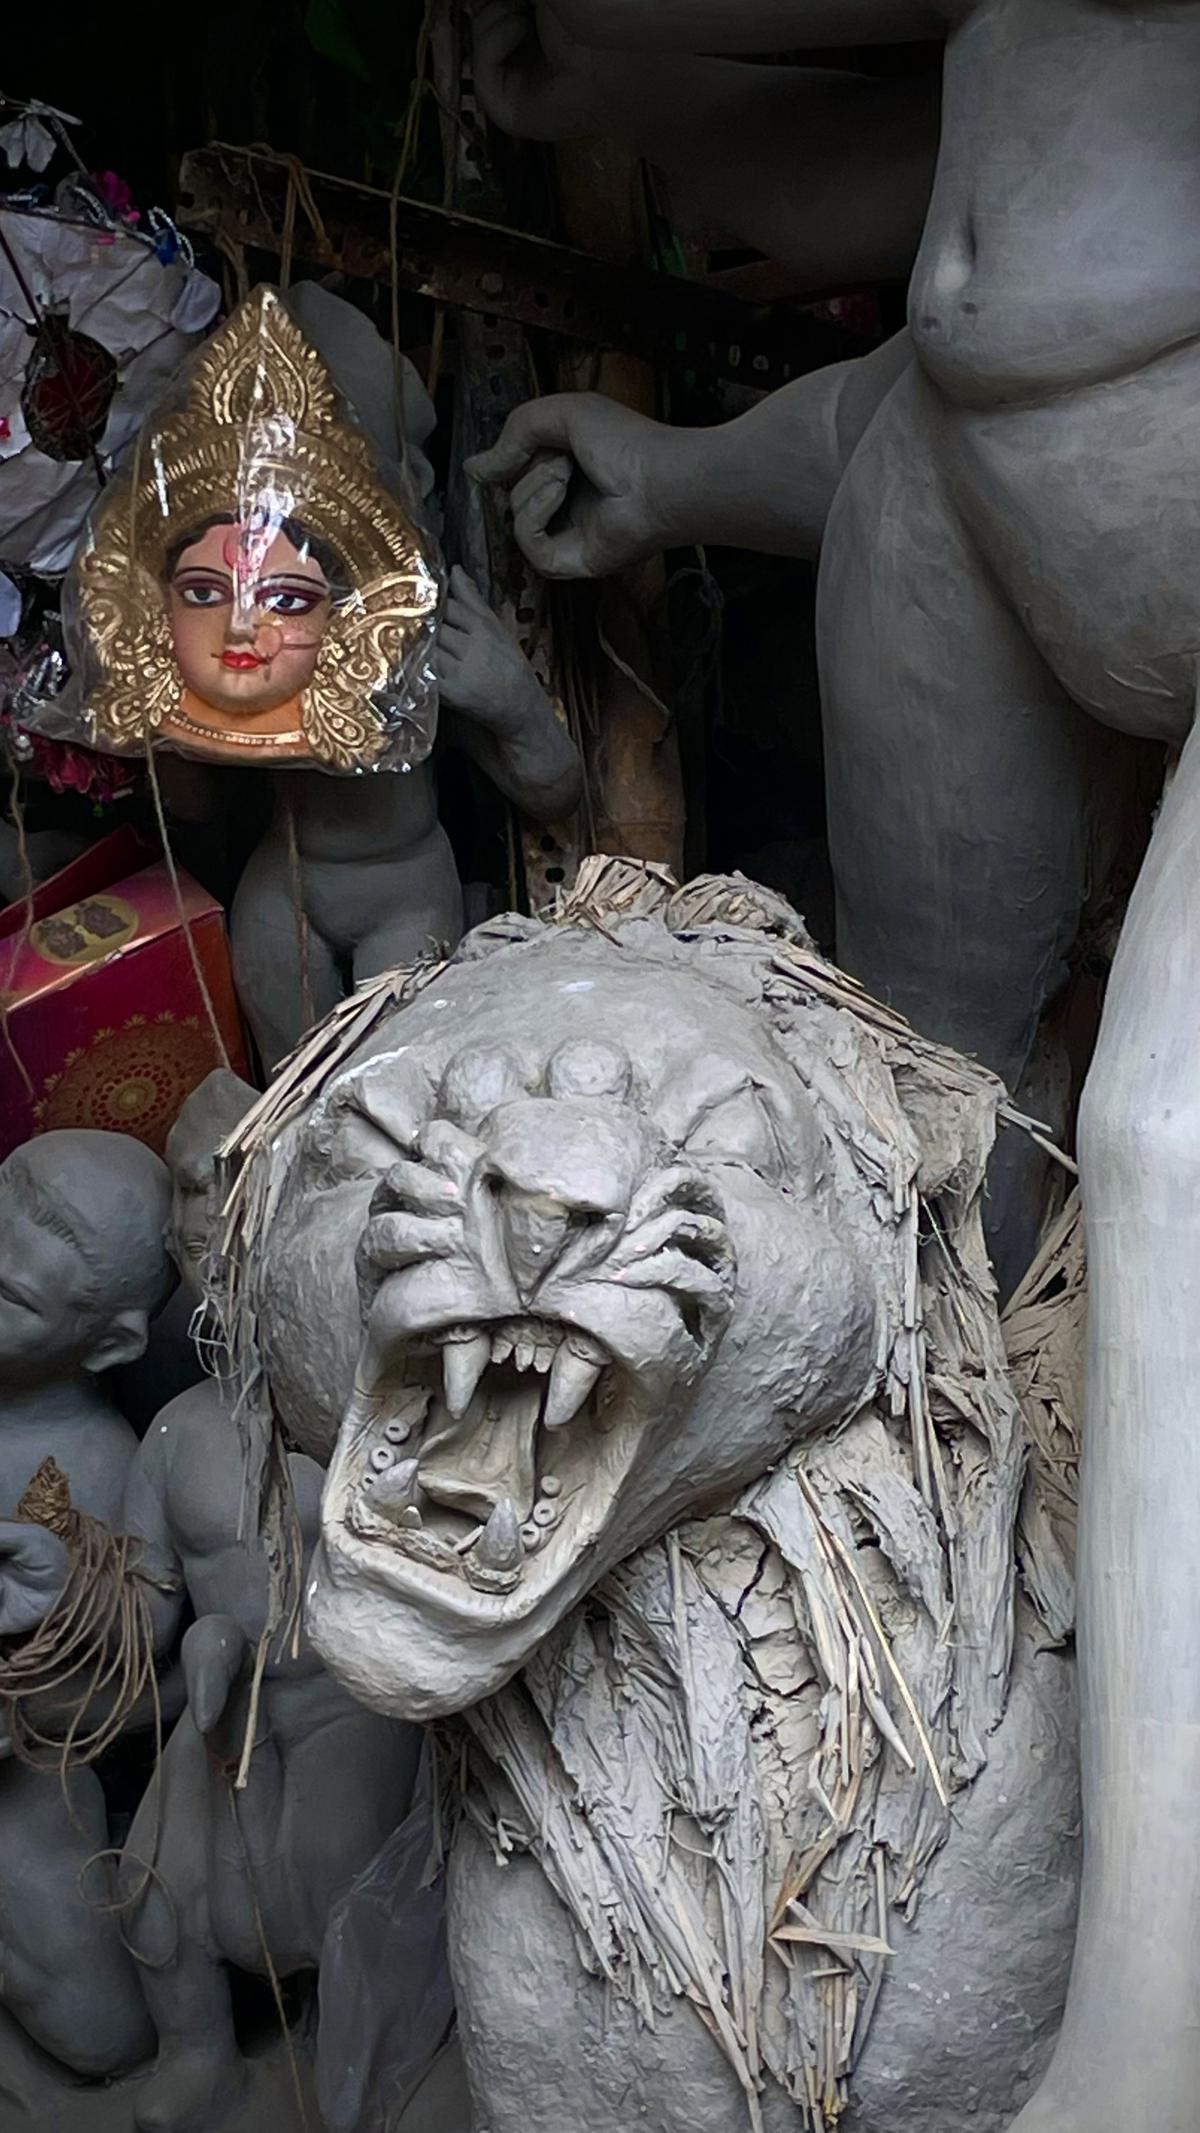 Drama is at every turn in the streets of Kumartuli 